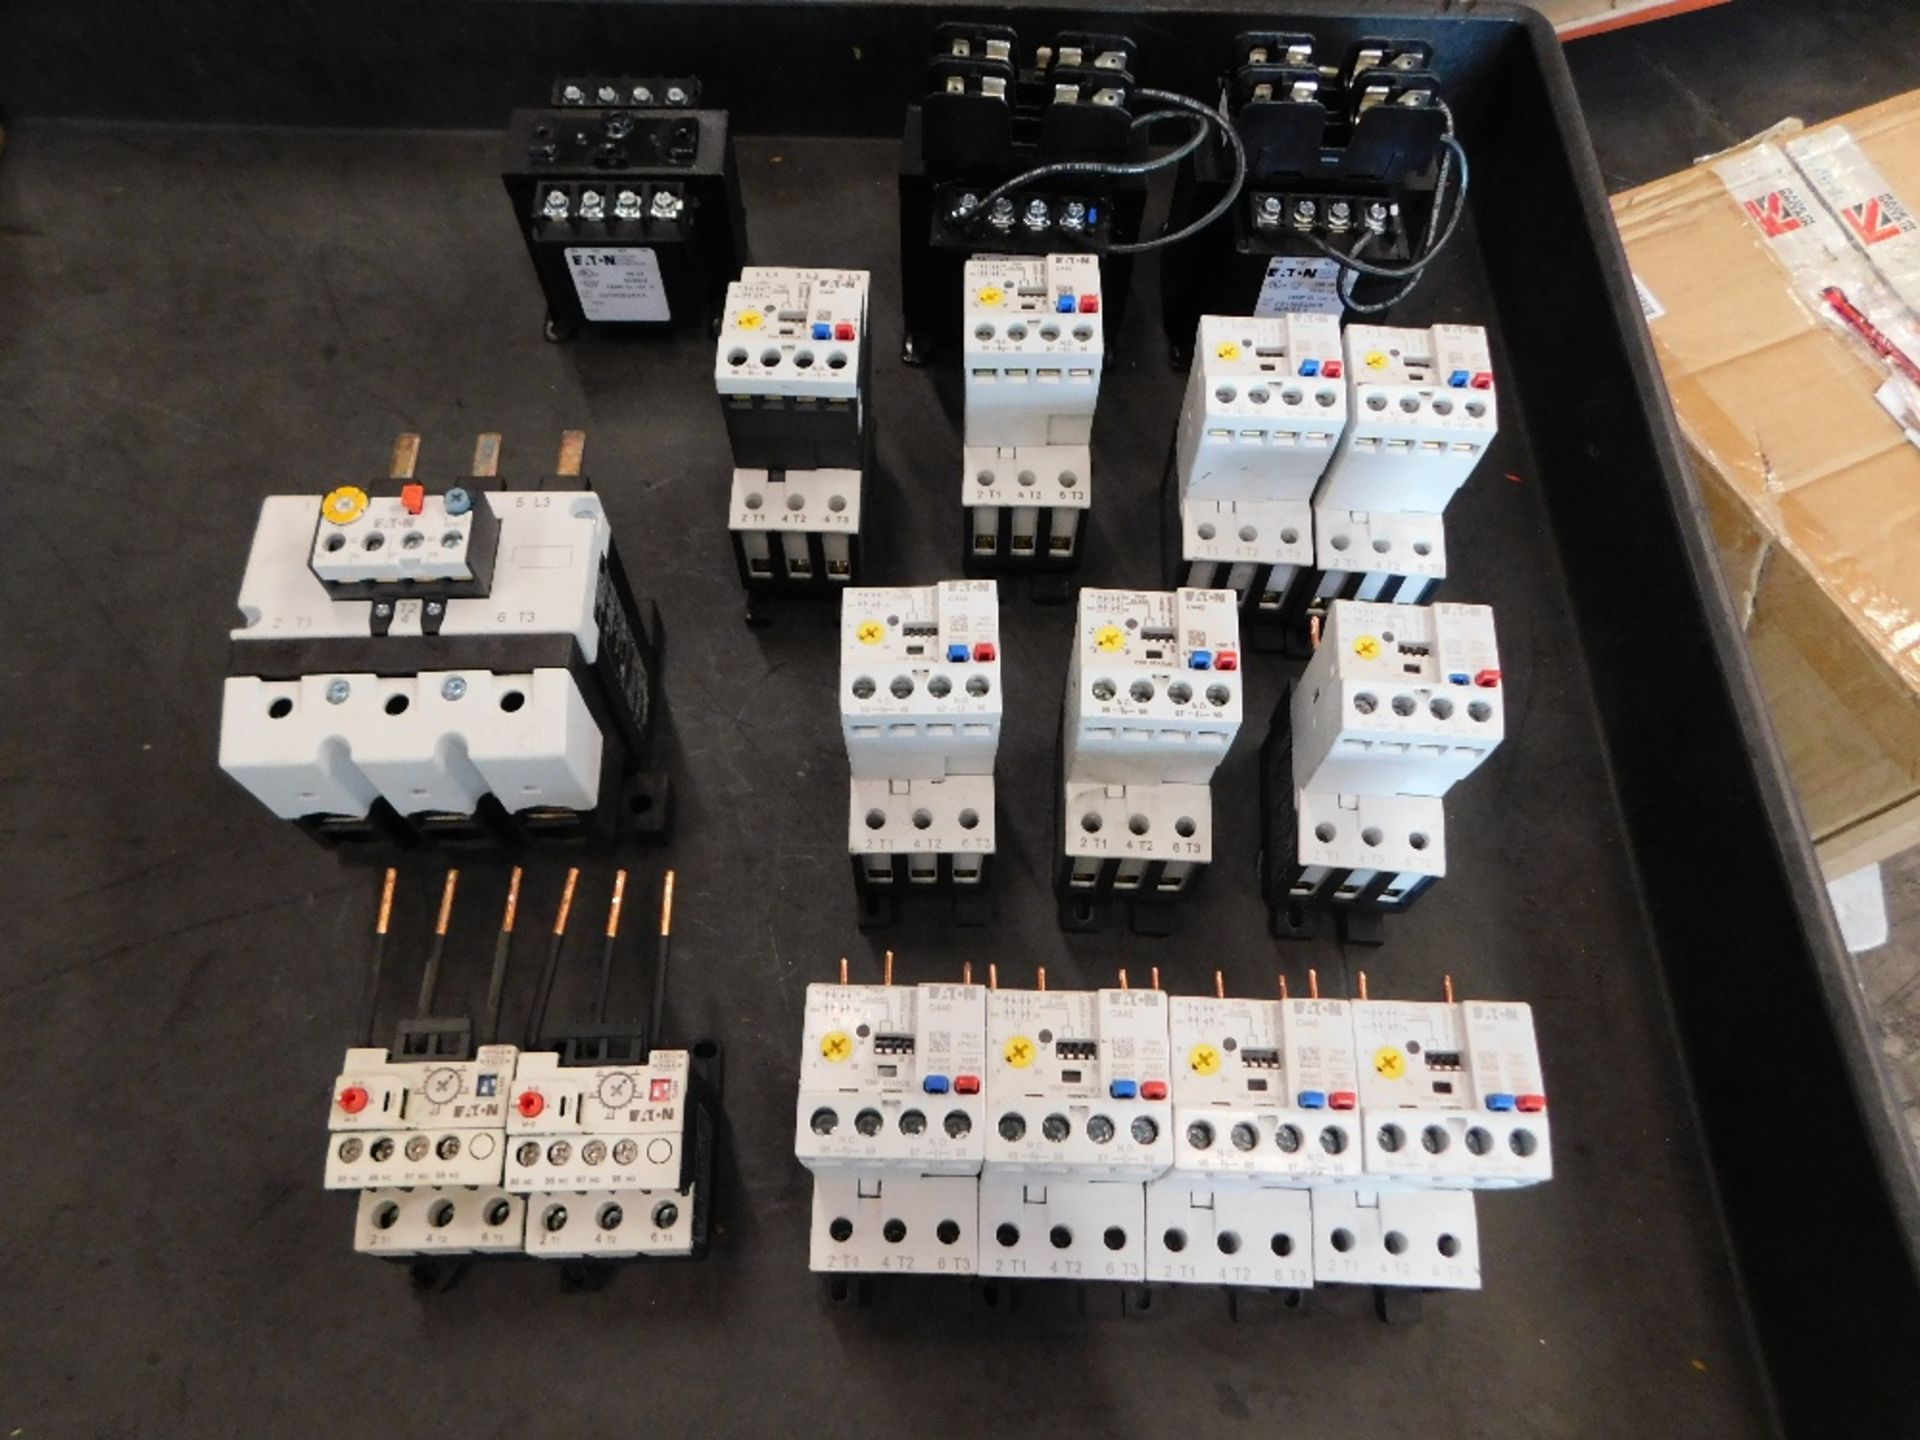 19x Eaton Relays and Transformers - Assorted Models